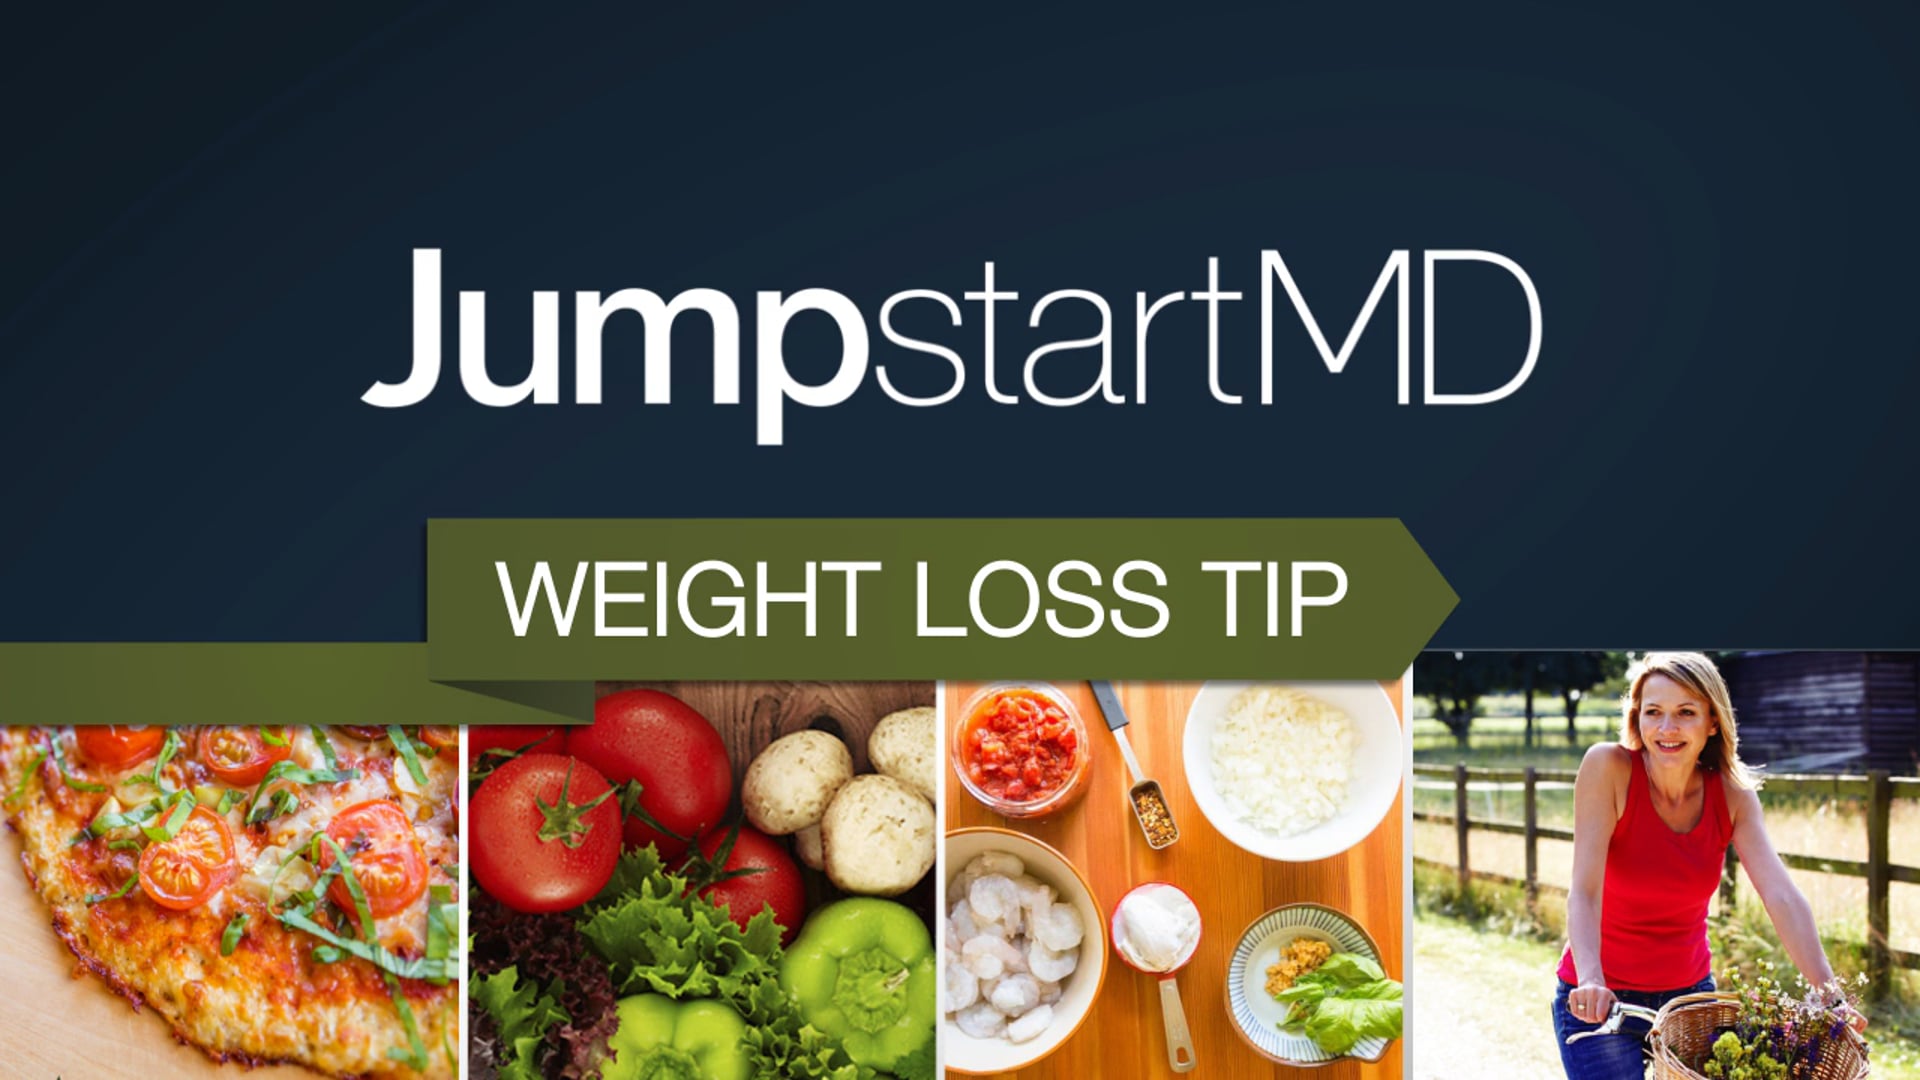 JumpstartMD Weight Loss Tips Campaign